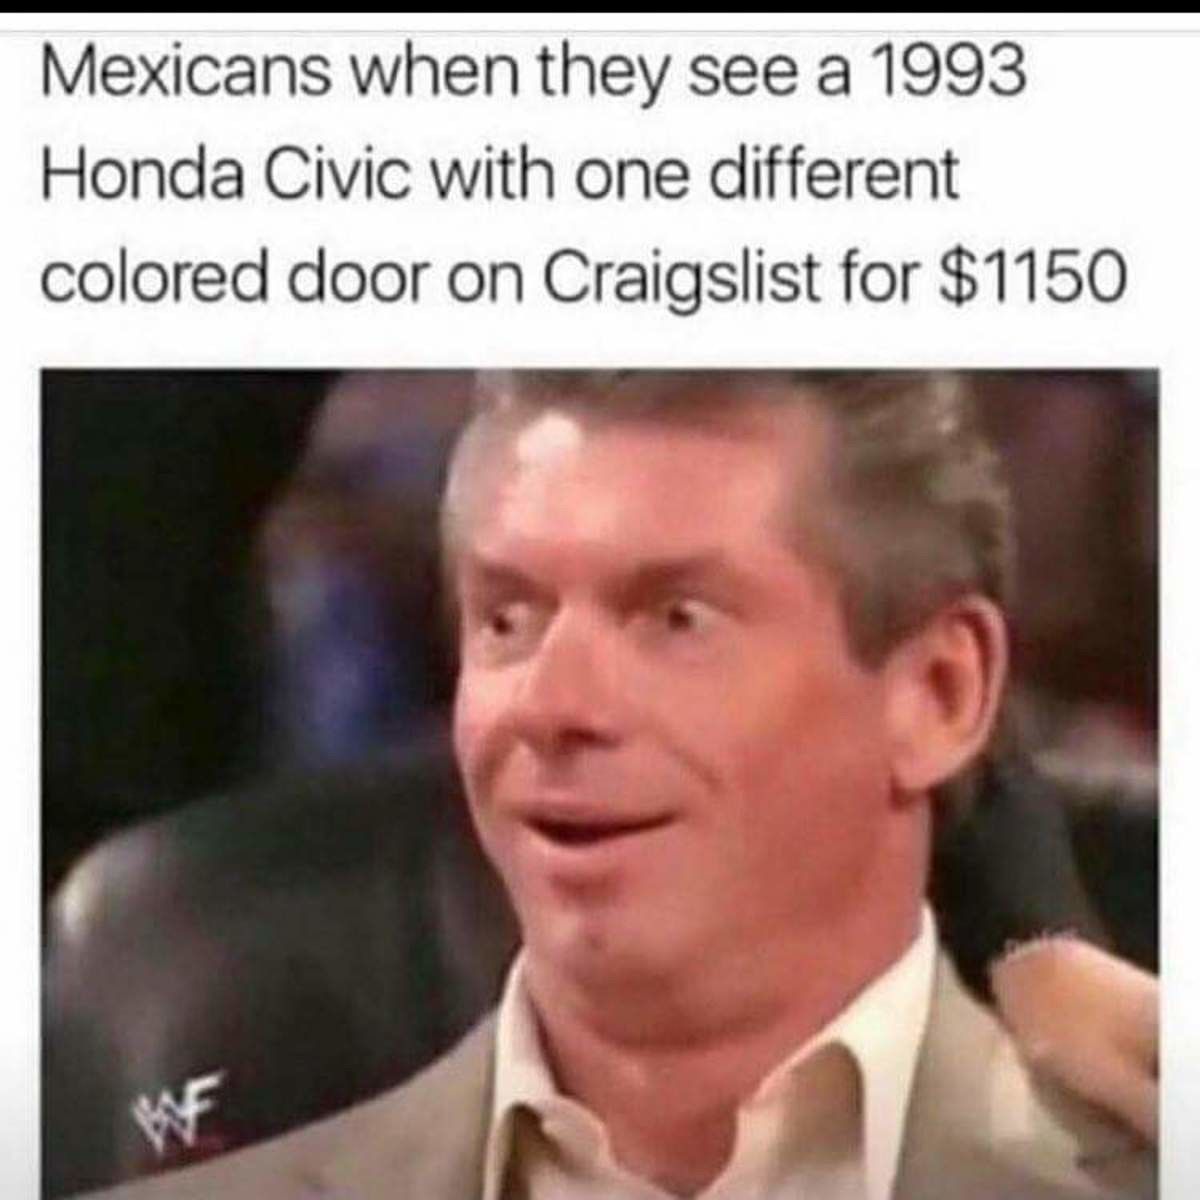 any mexican here?